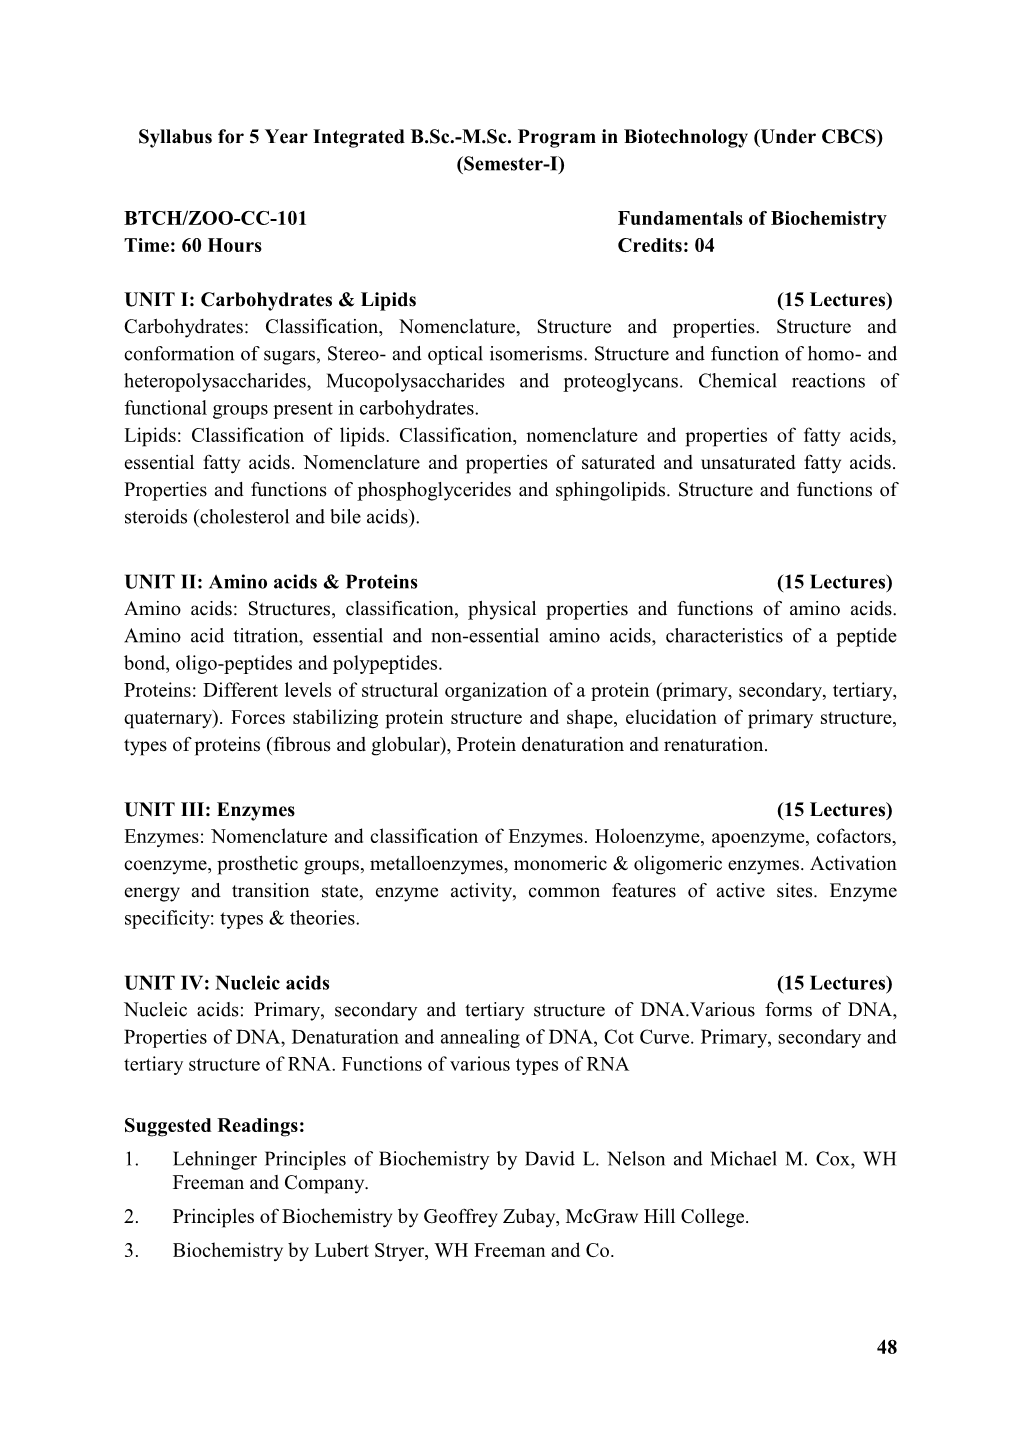 Syllabus for 5 Year Integrated B.Sc.-M.Sc. Program in Biotechnology (Under CBCS) (Semester-I)